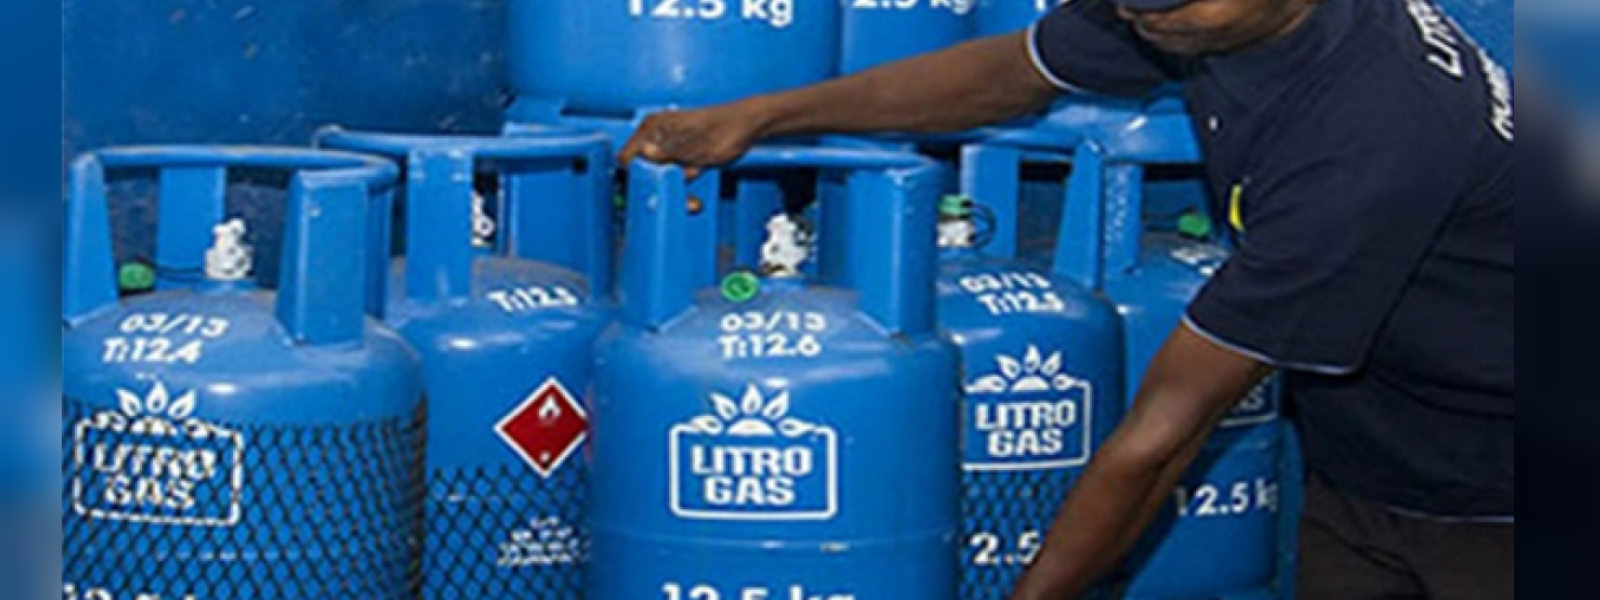 Litro Gas yet to clarify "misleading" new product